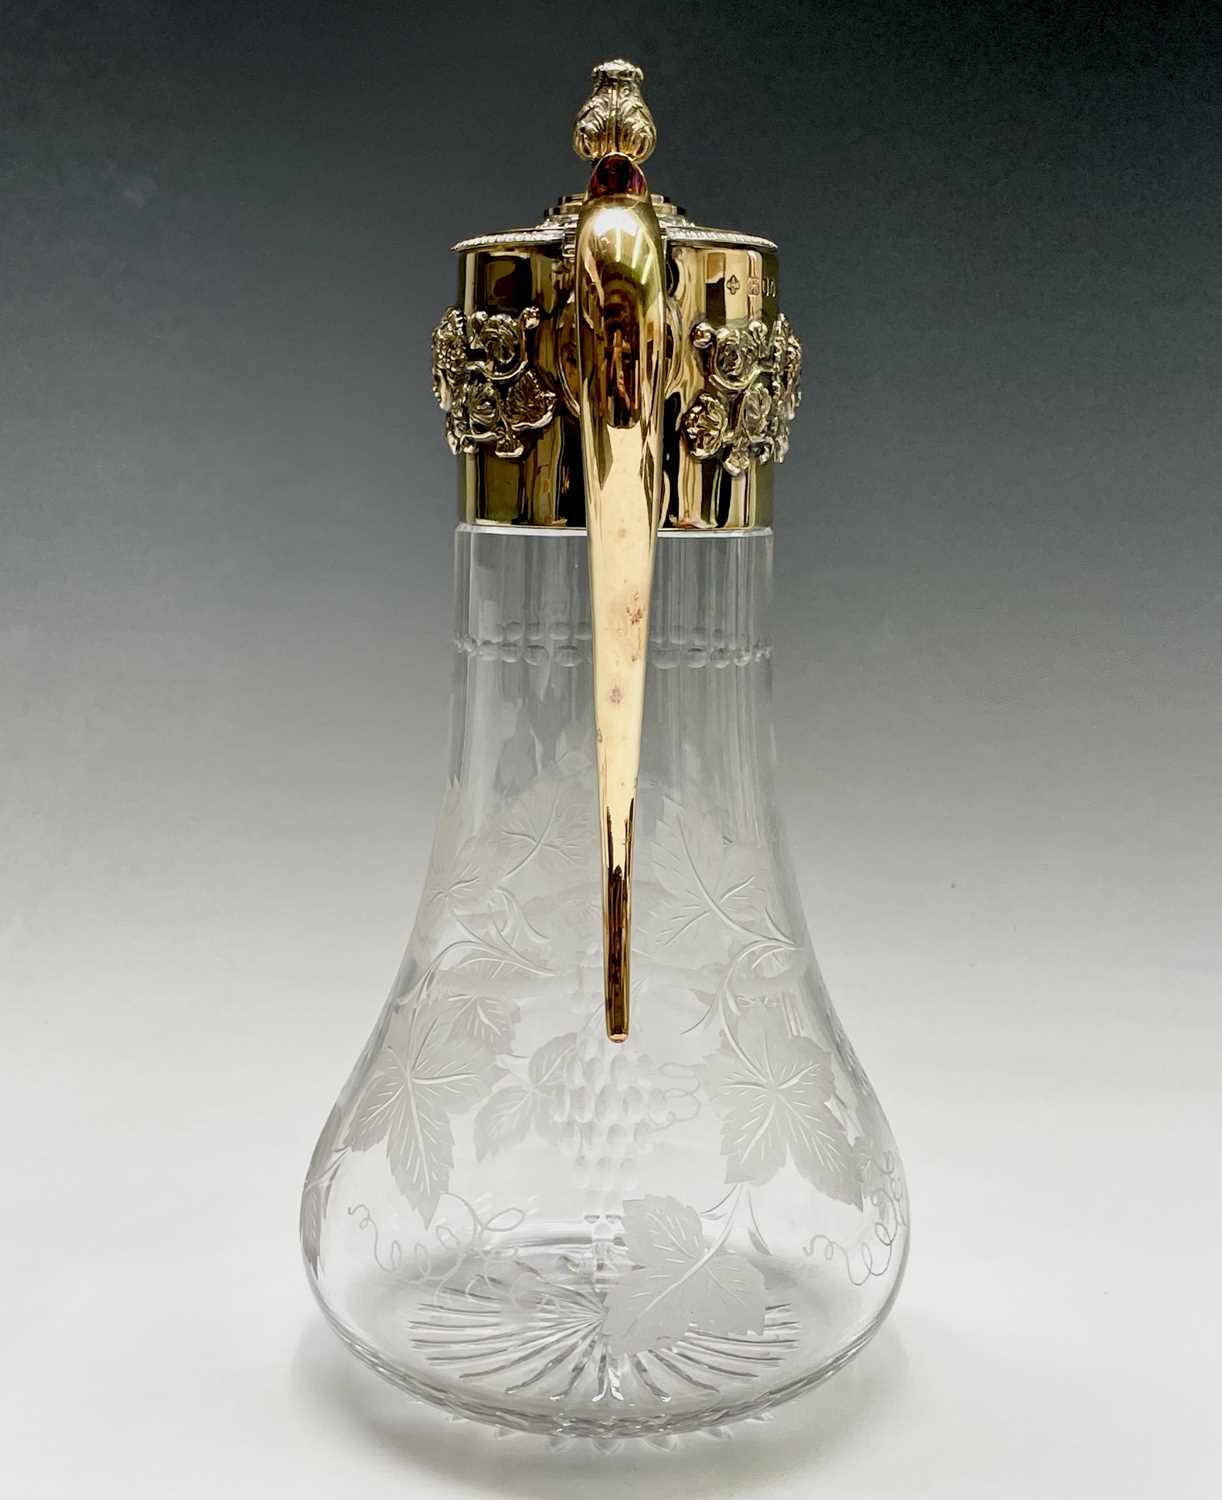 An Asprey claret jug the glass body cut and engraved with vines the silver-gilt mount with - Image 2 of 16